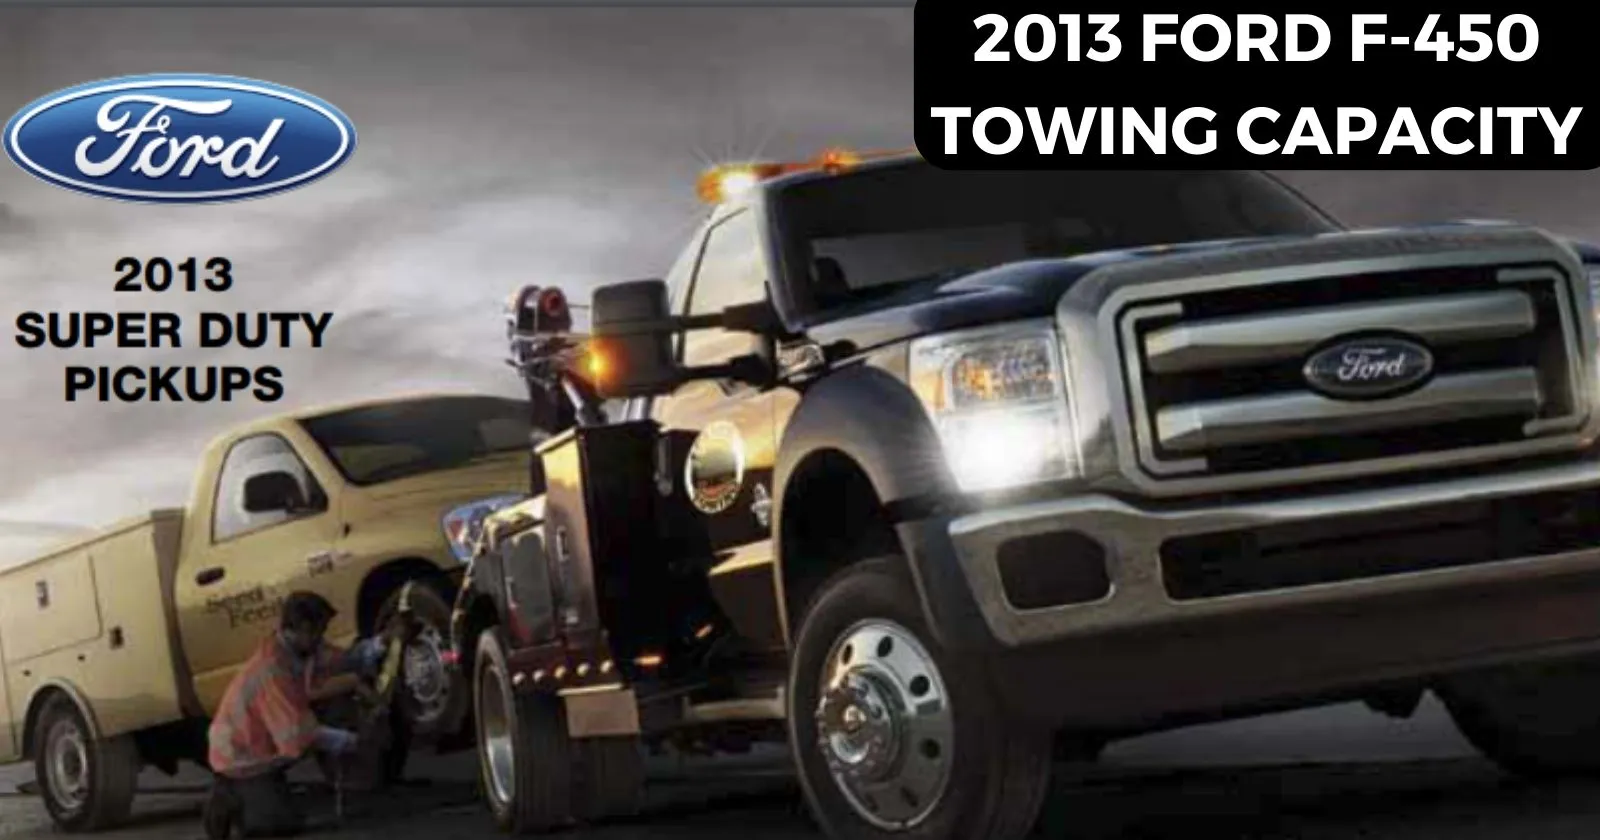 explore-2013-ford-f-450-towing-capacity-with-chart-thecartowing